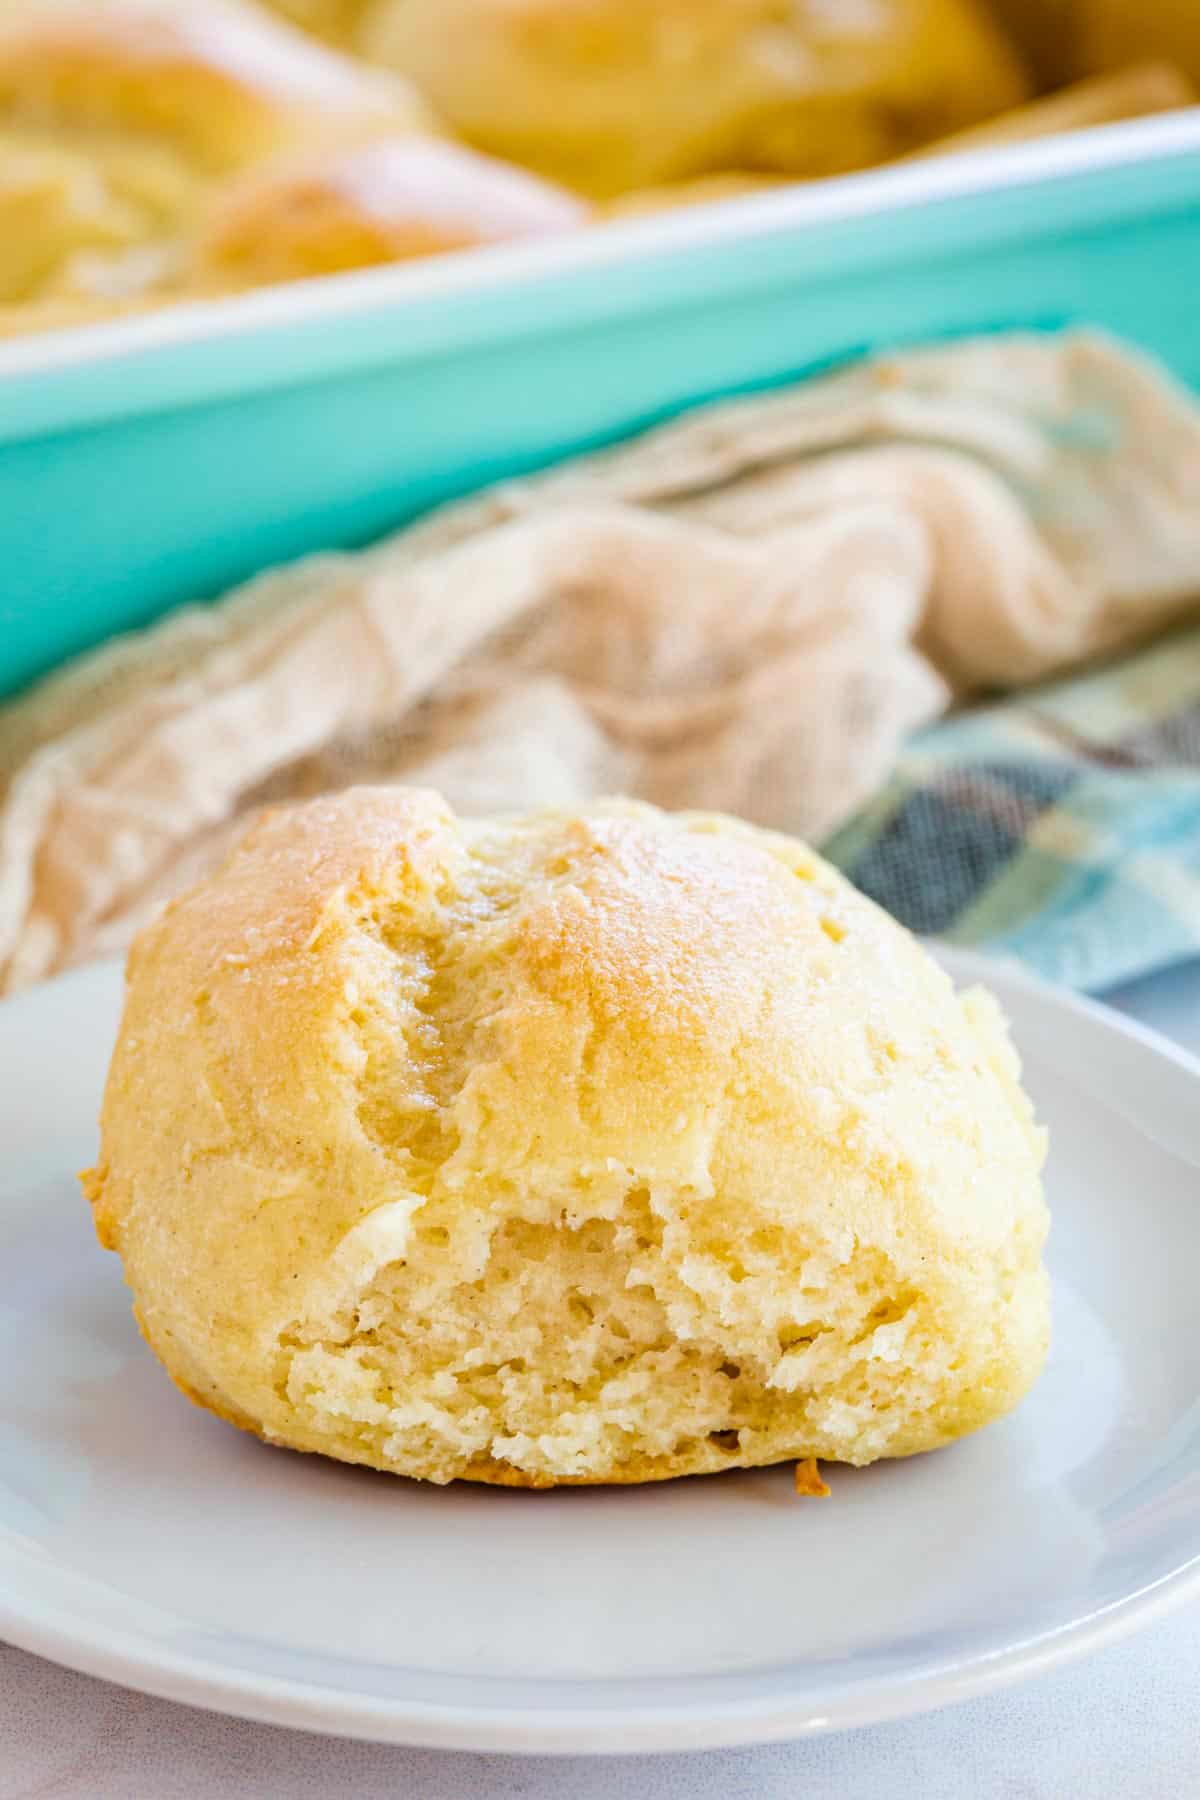 one dinner roll on a white plate with the baking pan behind it